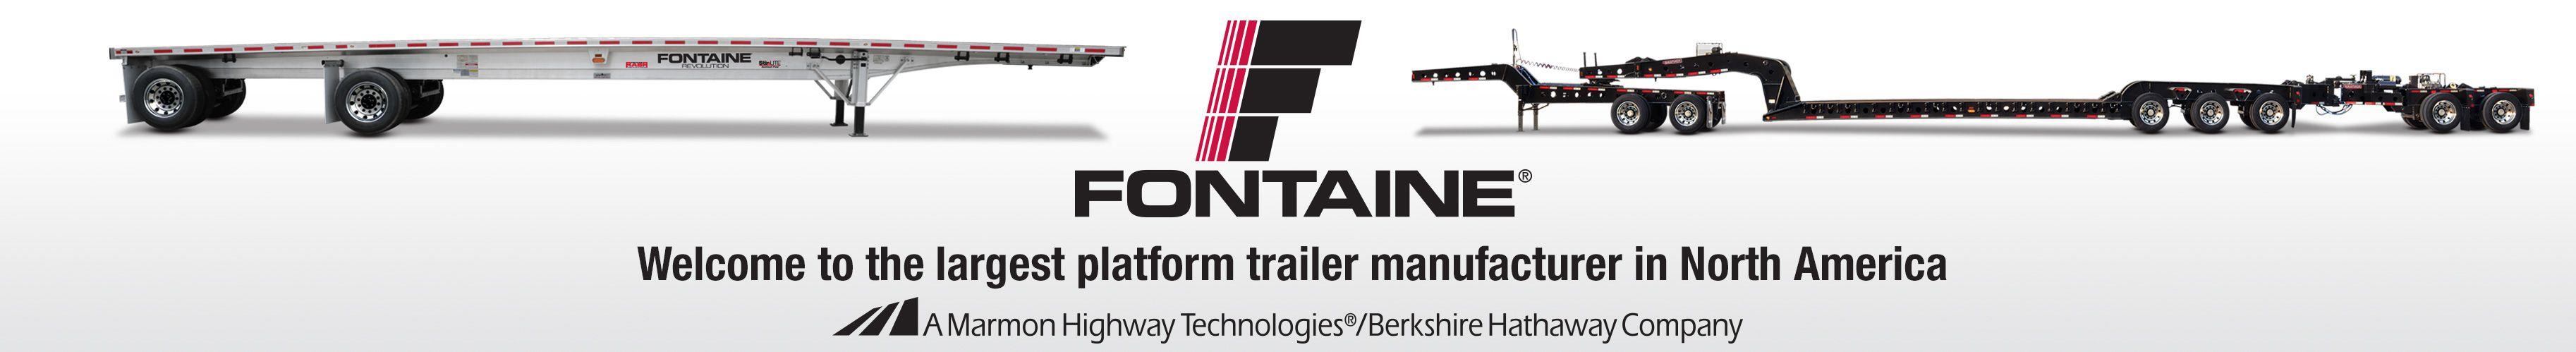 Trailer Logo - Fontaine Trailer, Flatbed Trailers, Flat bed trailers, Trailer Drops ...